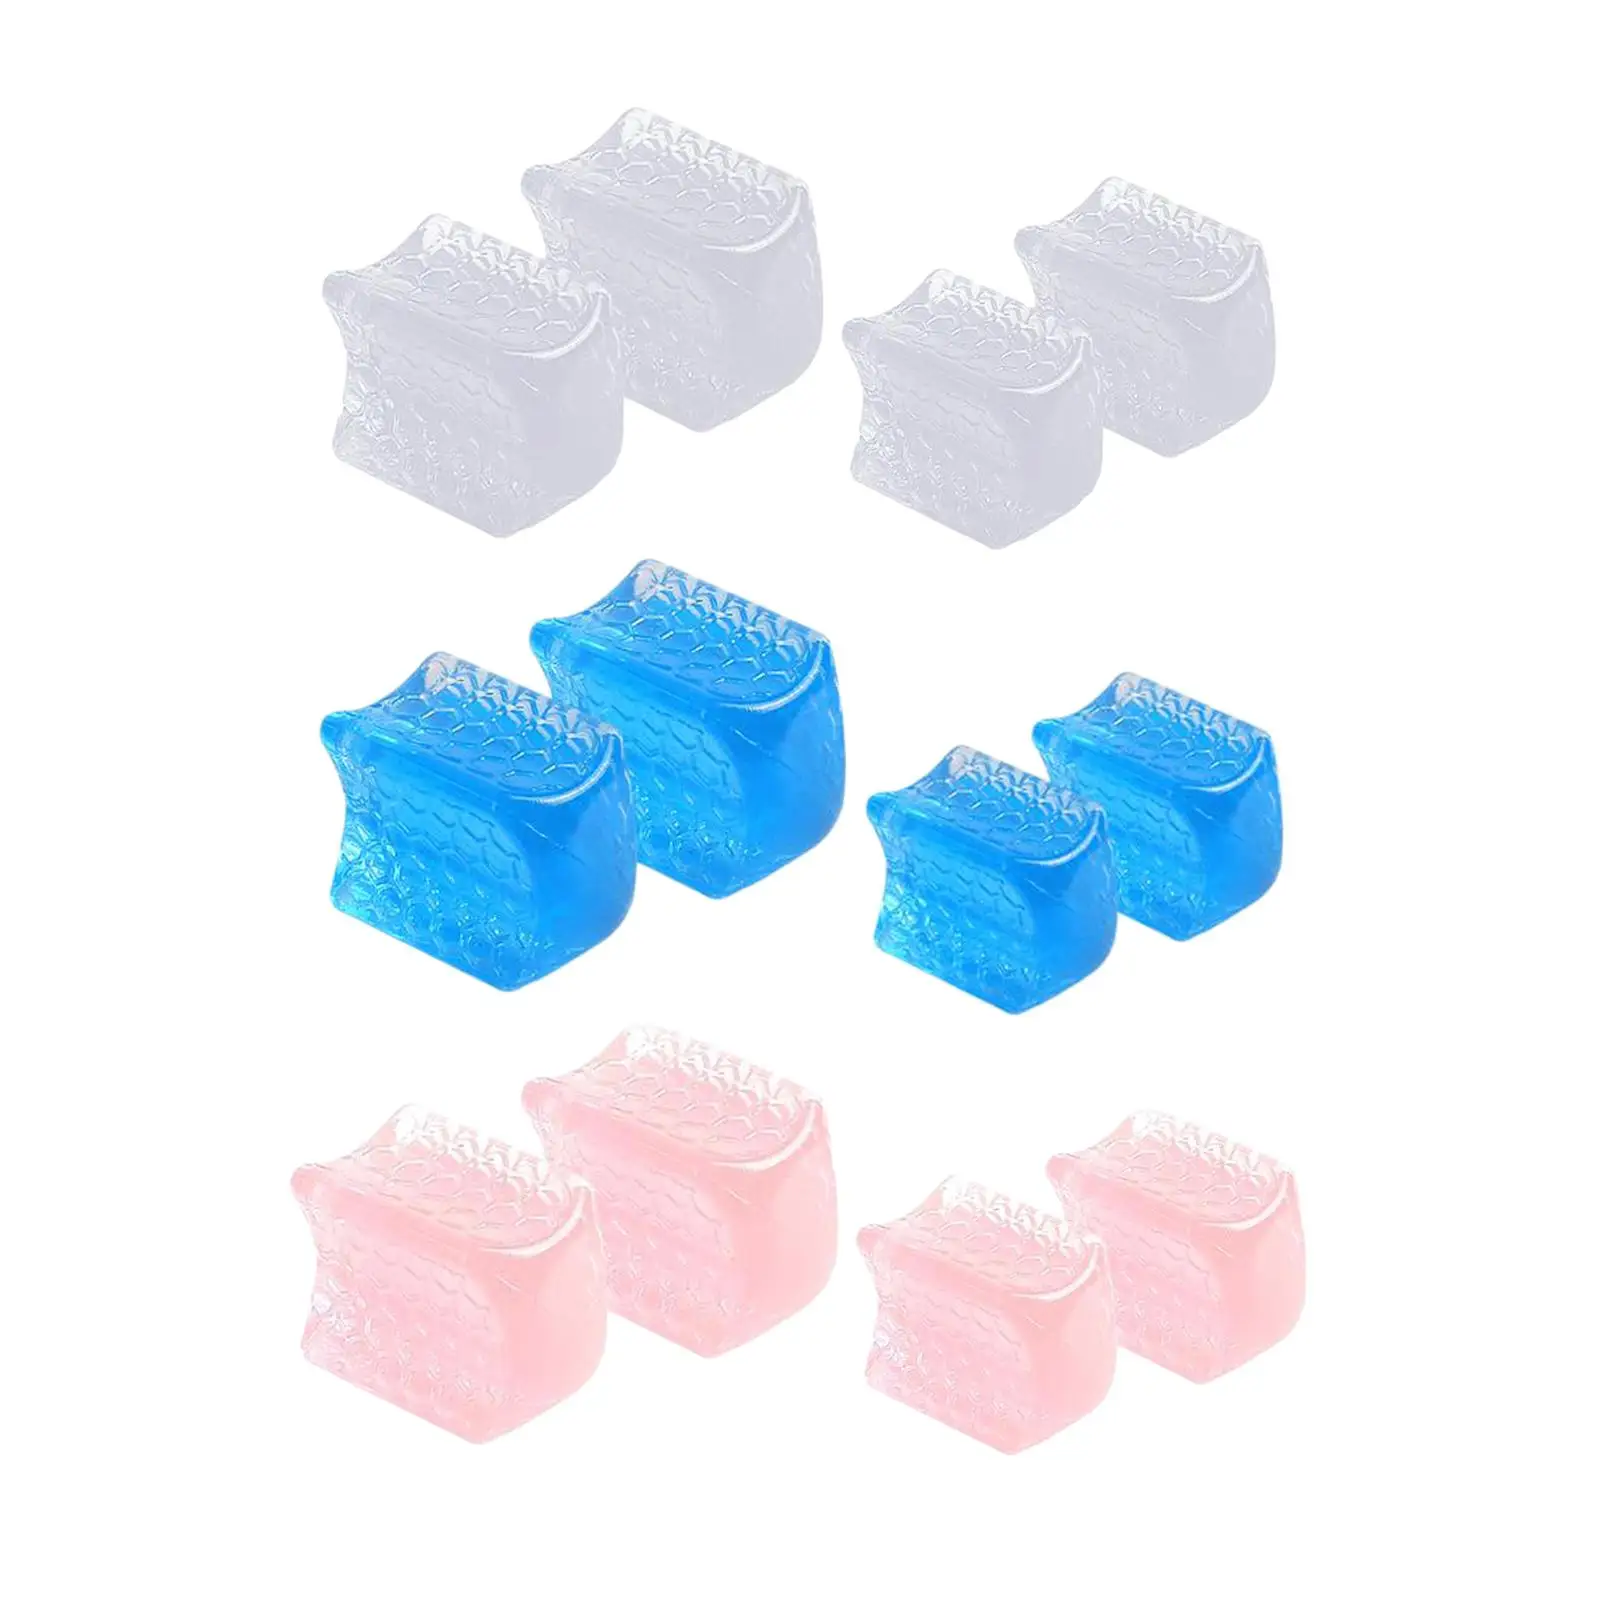 4Pcs SilicToe Separators Stretcher Separate Curled Overlapping Toe